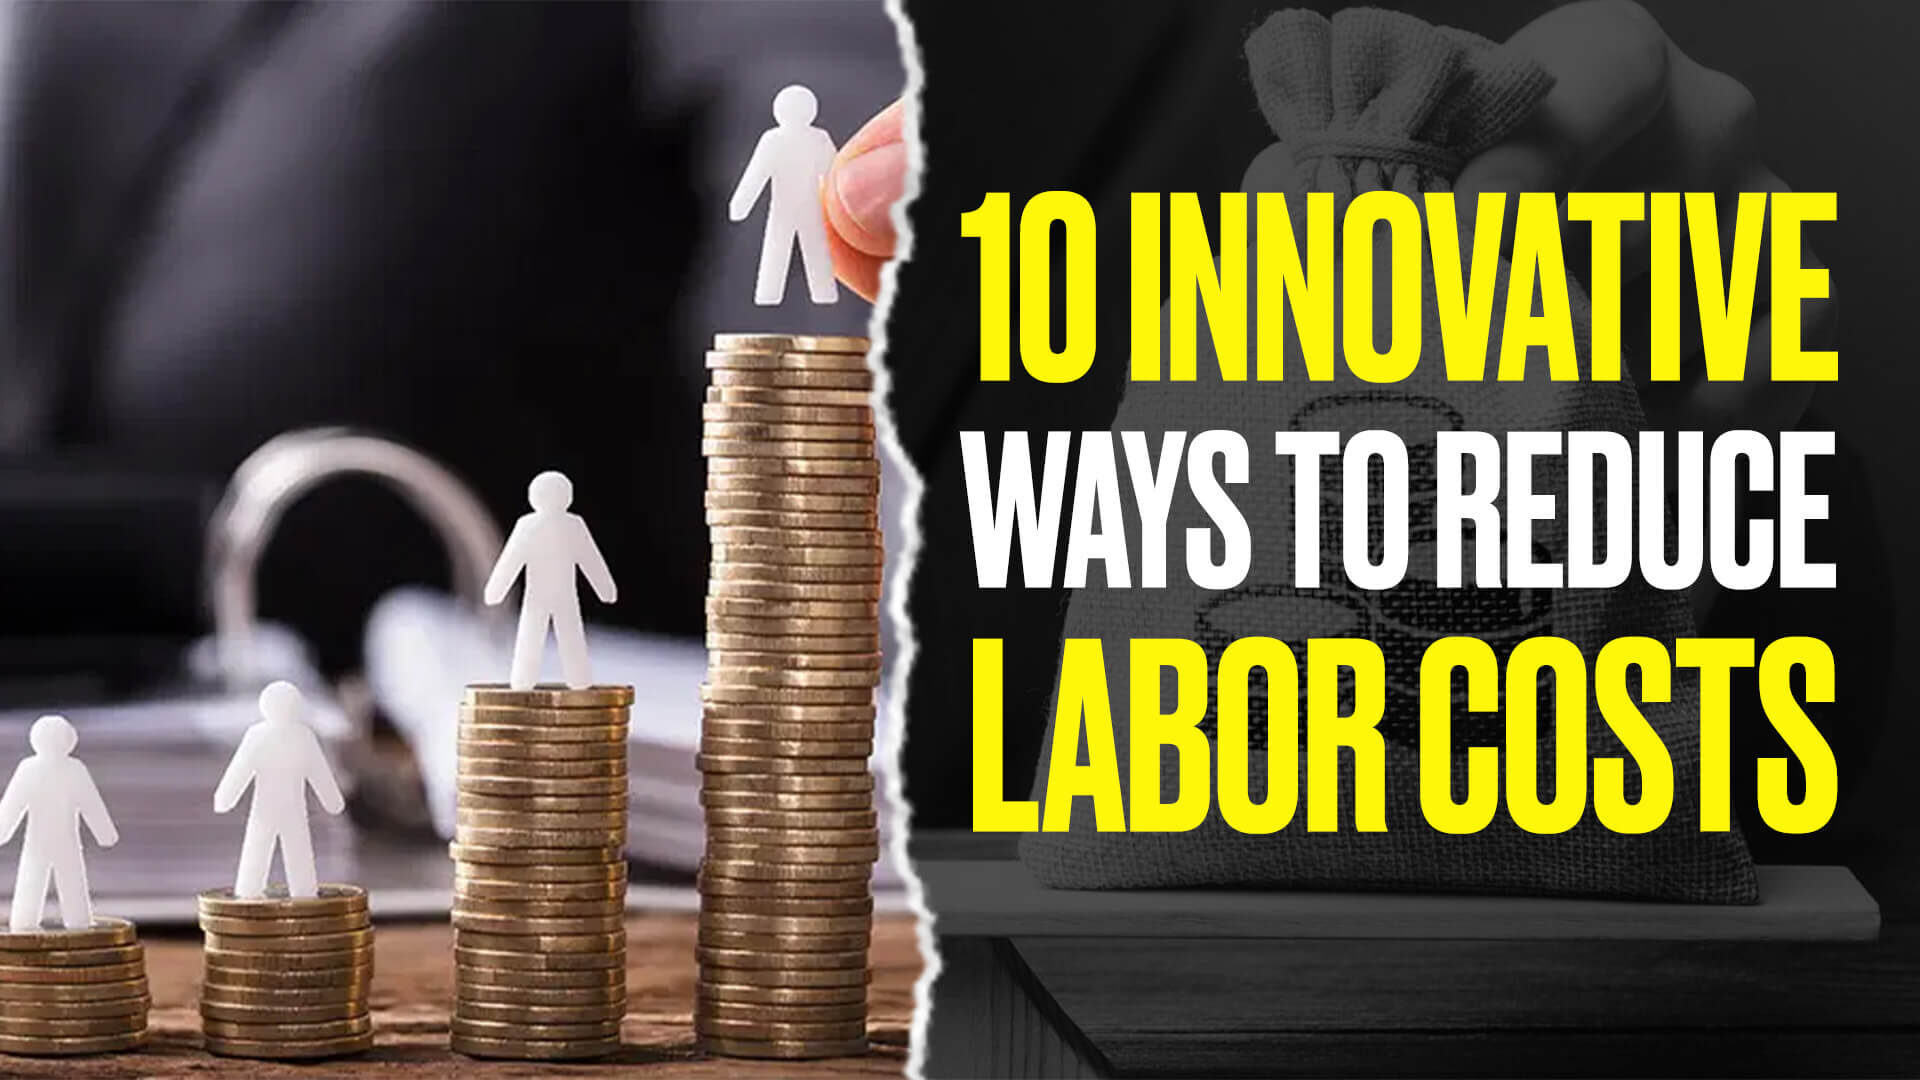 10 Innovative Ways to Reduce Labor Costs and Boost Profitability in Your_Business